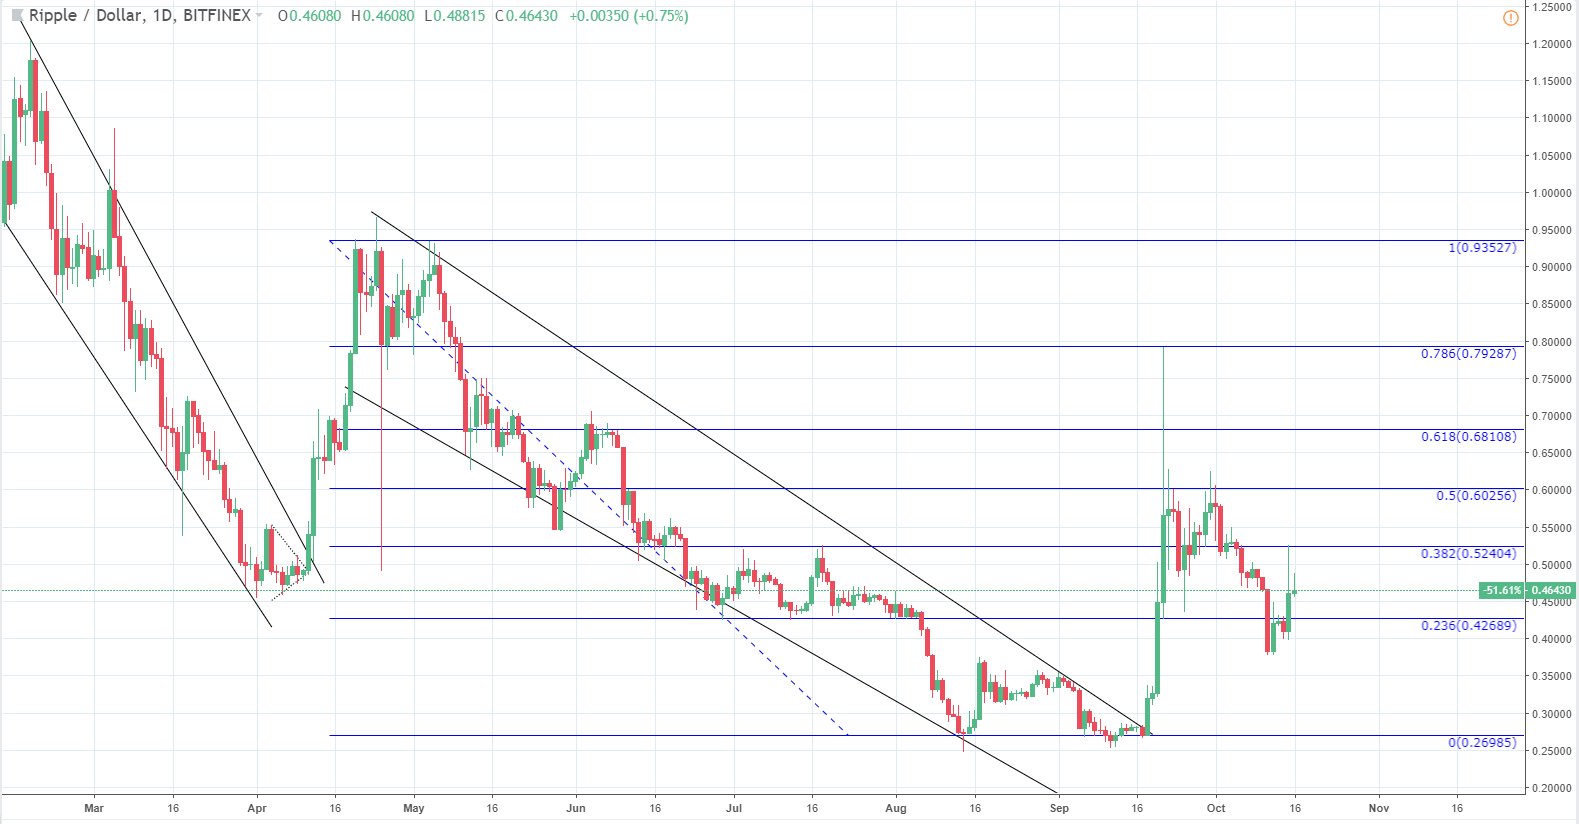 BTC/USD forming a symmetrical triangle as well as XRP/USD